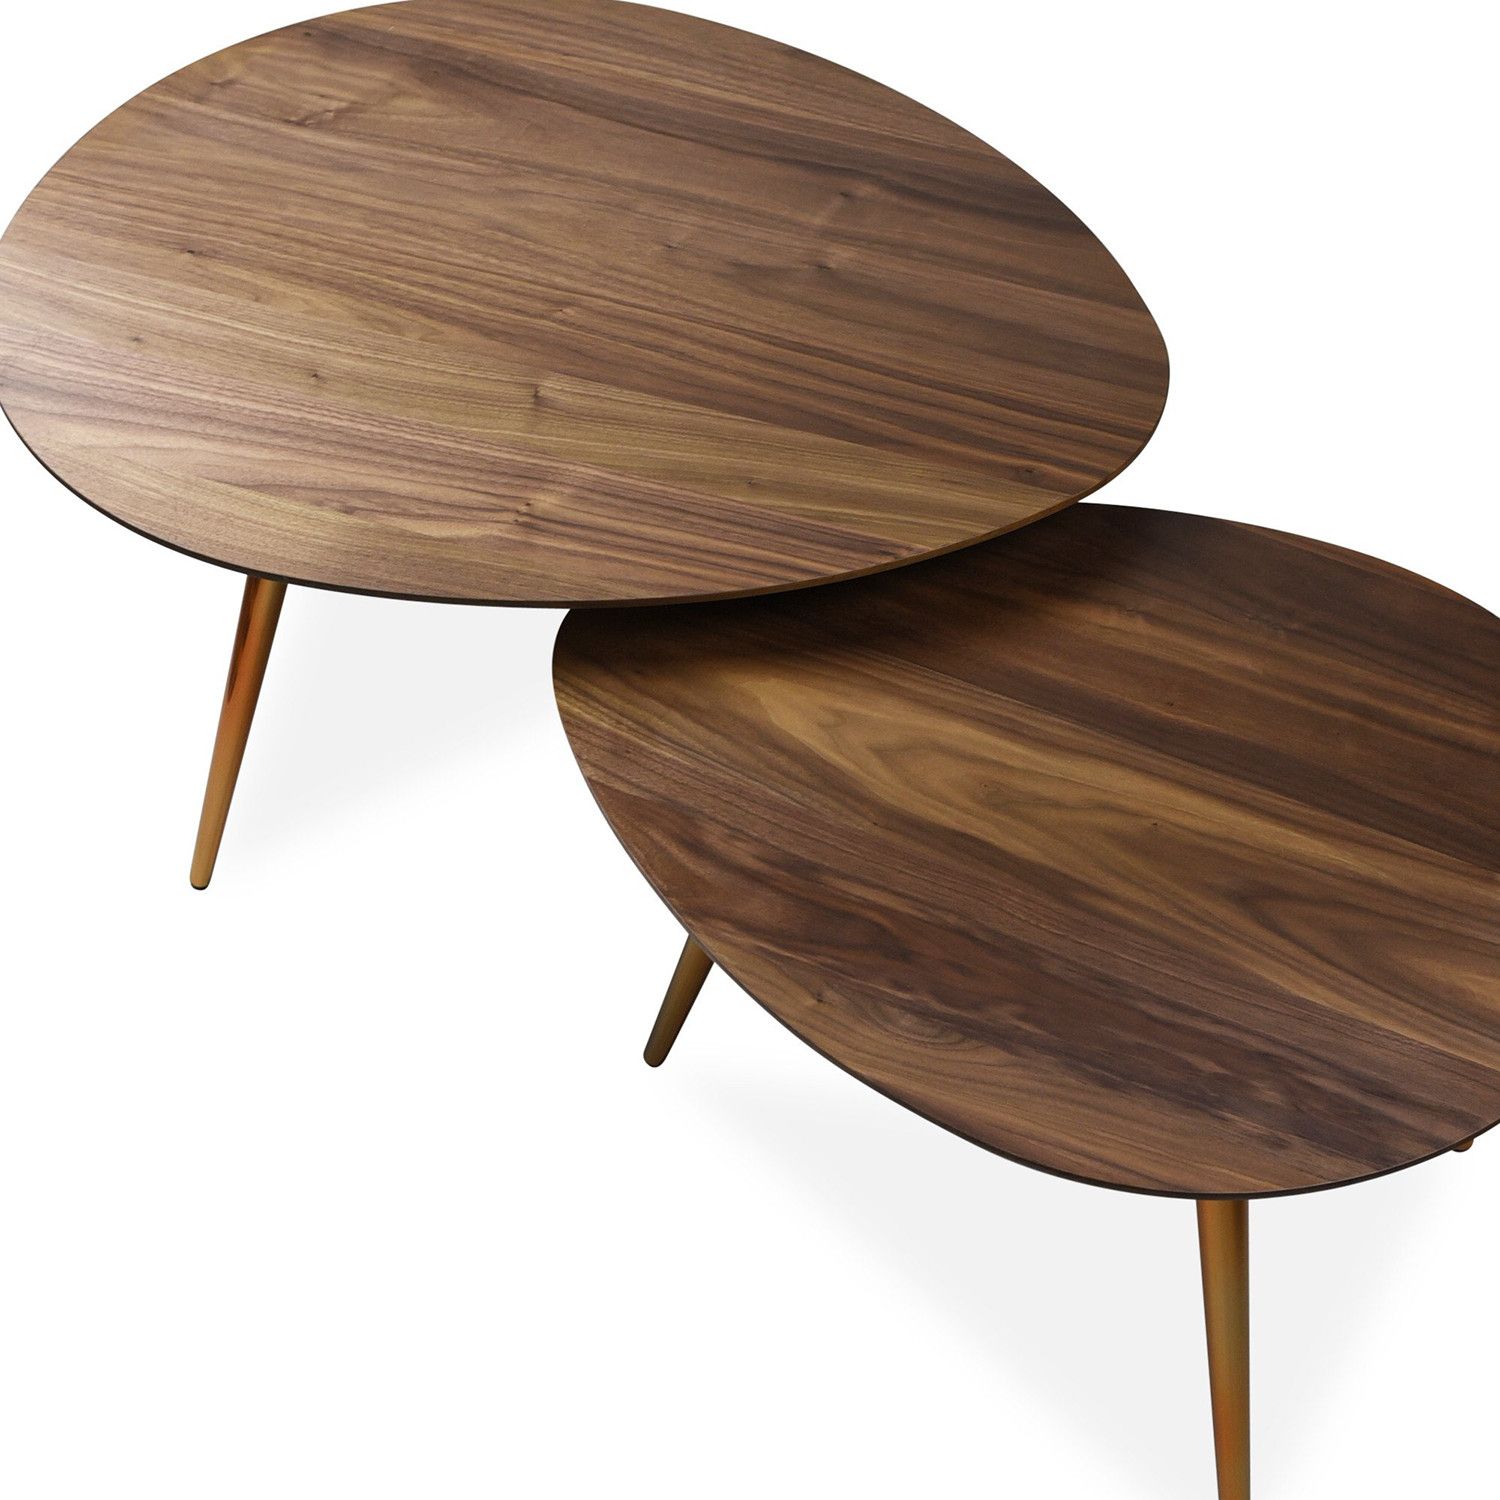 Maddox Mid Century Modern Nesting Coffee Table Set – Edloe Finch Pertaining To Wooden Mid Century Coffee Tables (View 14 of 15)